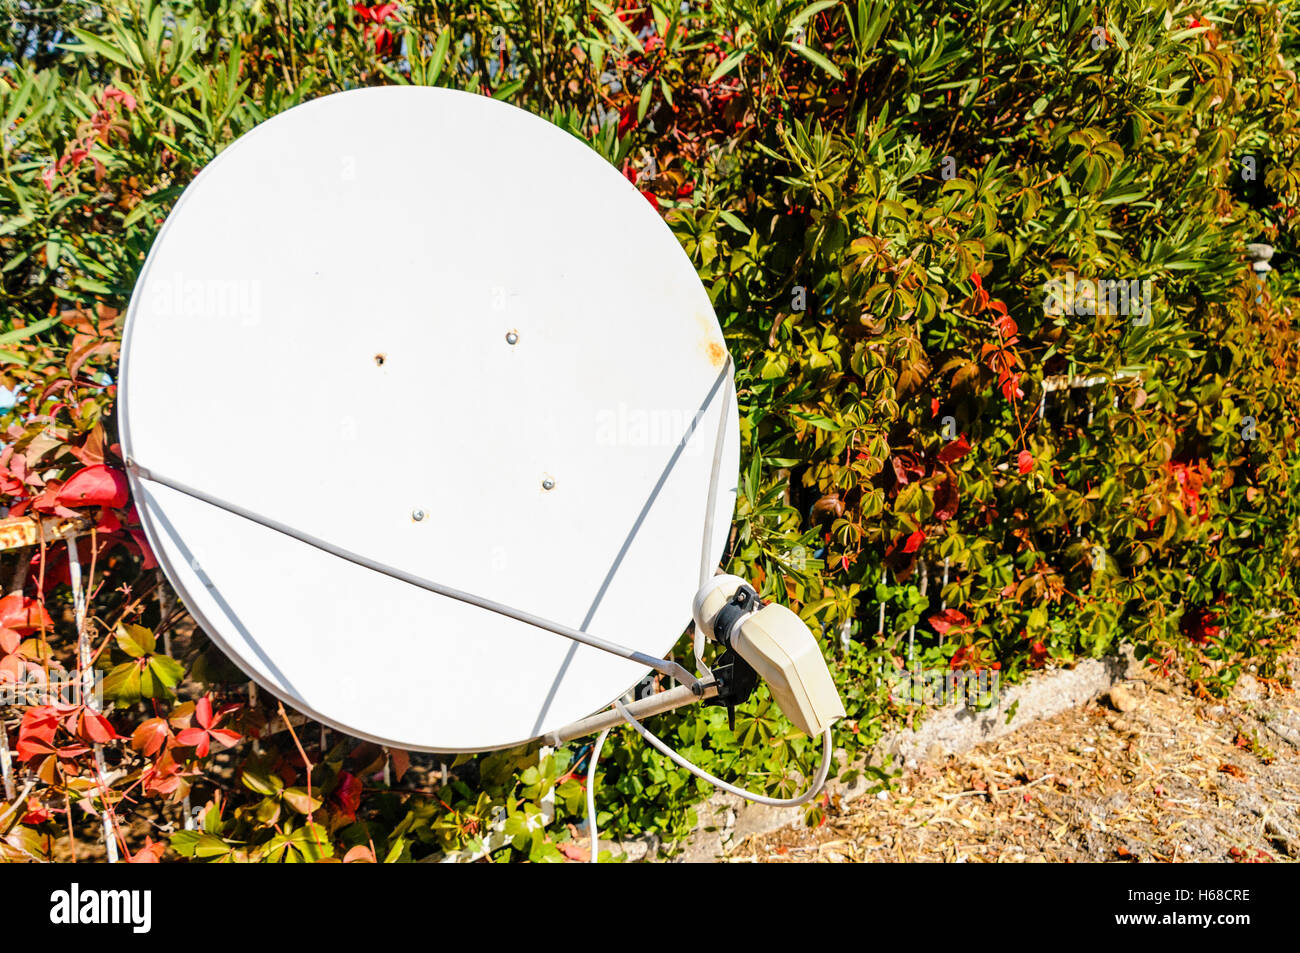 Unbranded satellite dish mounted on a fence beside a bush. Stock Photo